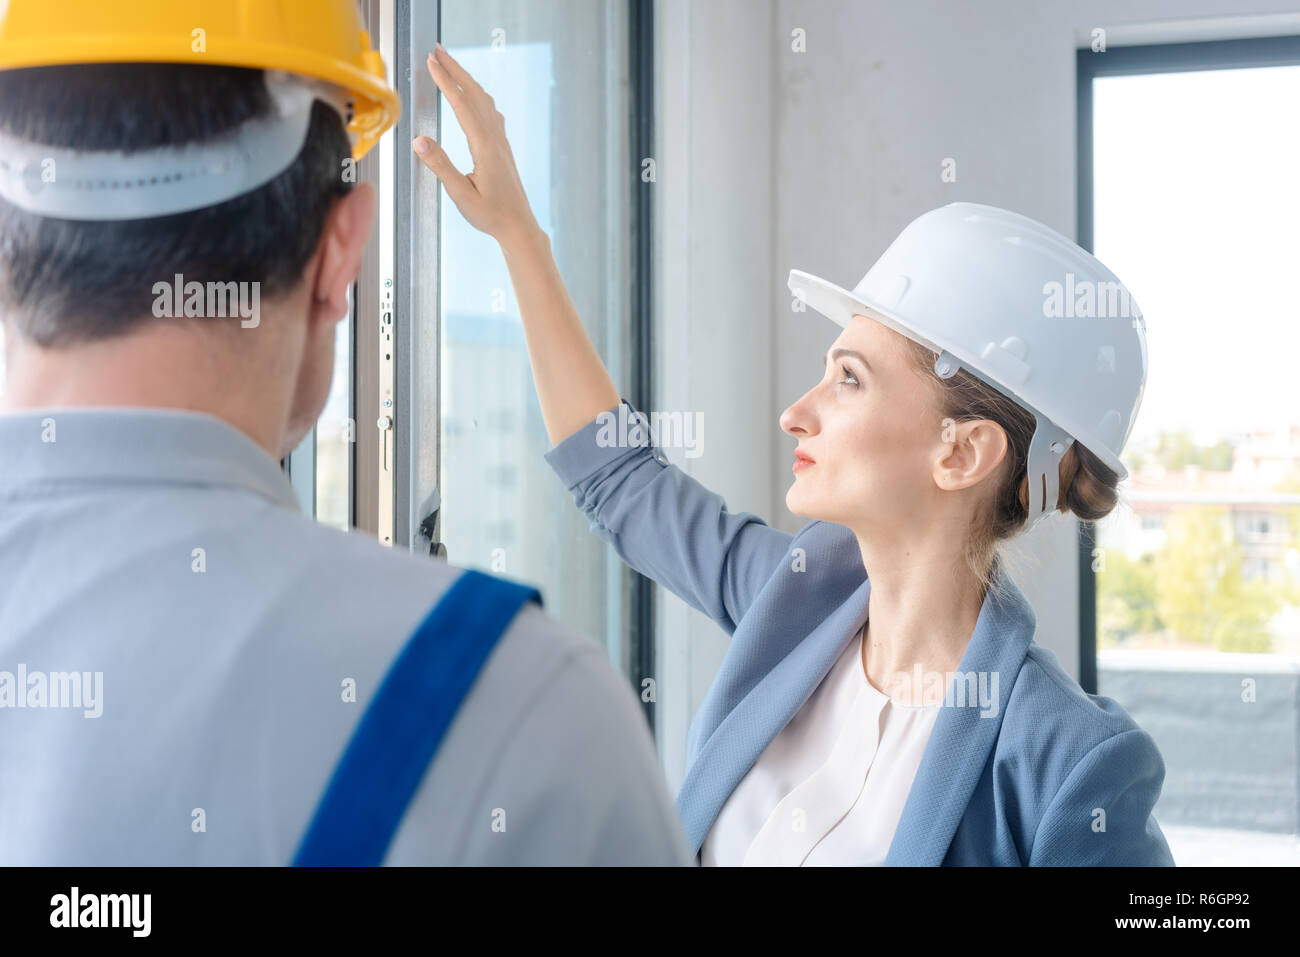 Architect and construction worker checking windows on site Stock Photo